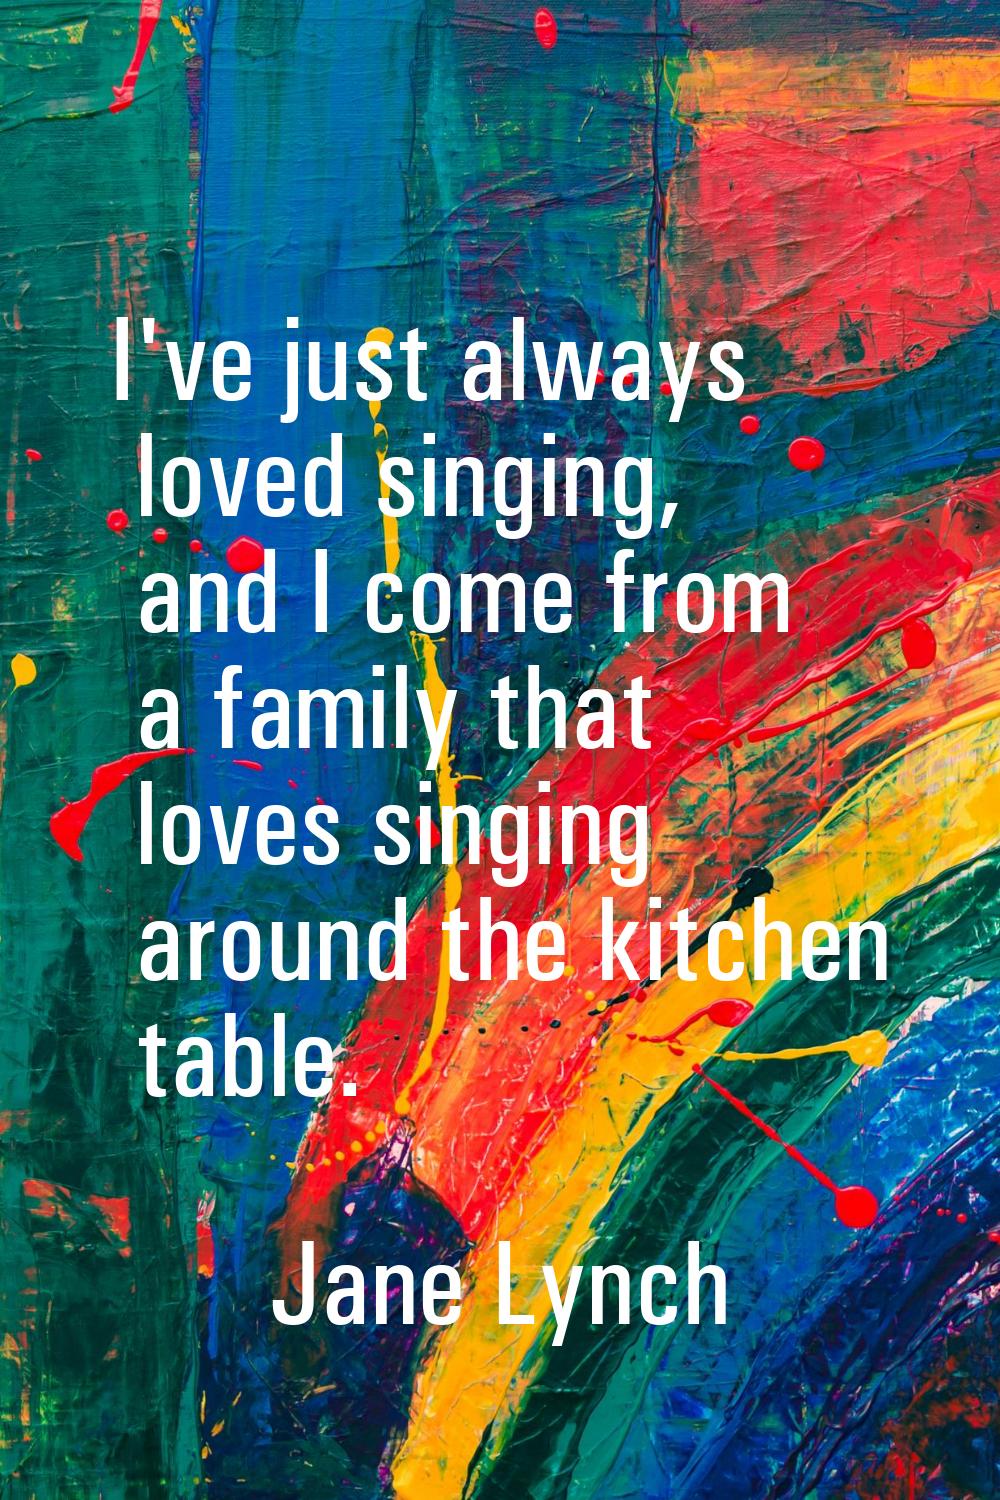 I've just always loved singing, and I come from a family that loves singing around the kitchen tabl